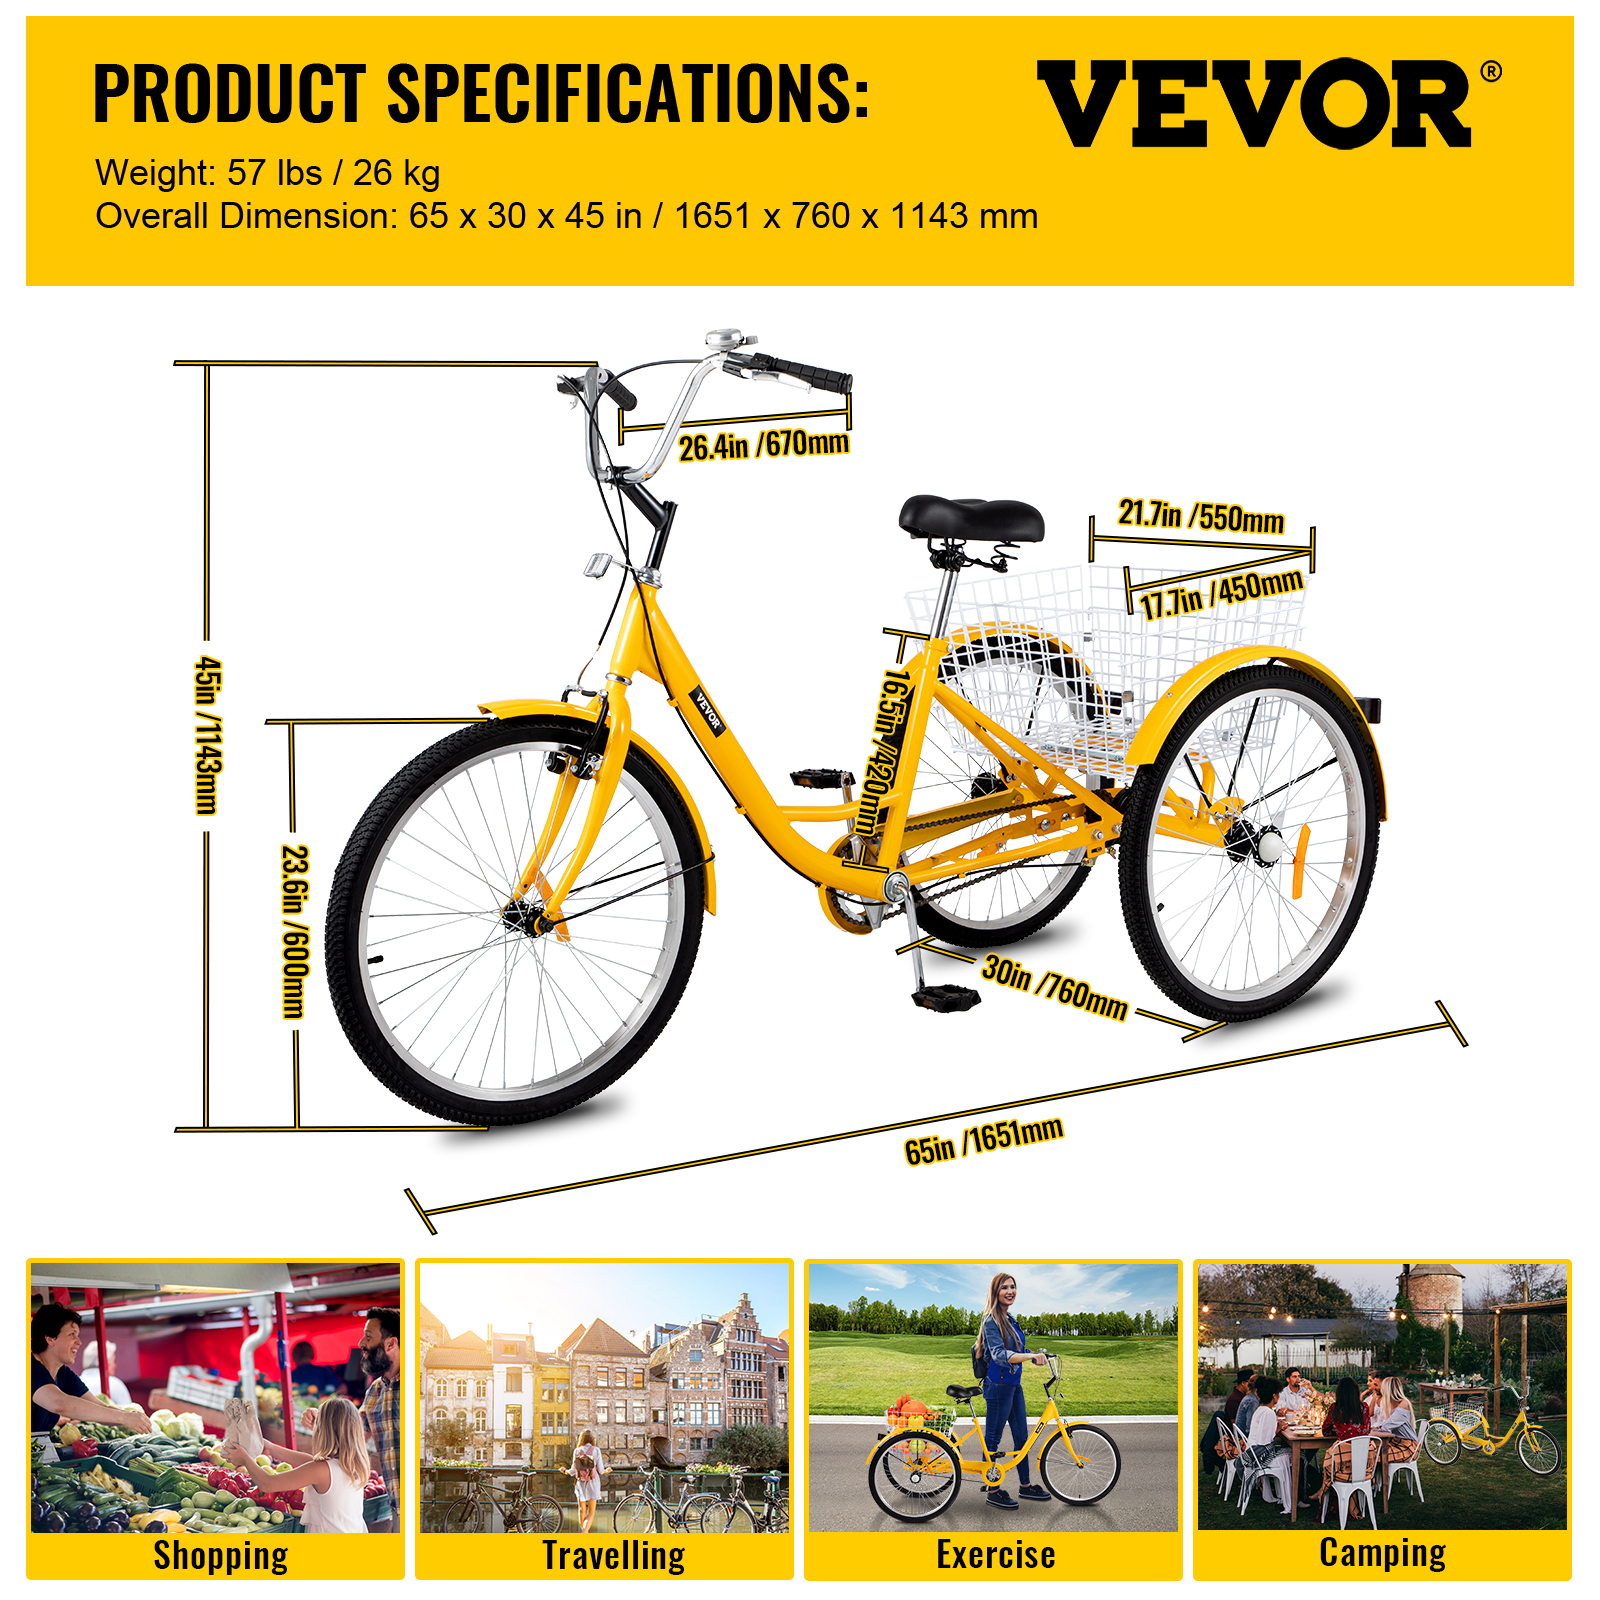 VEVOR Adult Tricycle 24 inch, 1-Speed Three Wheel Bikes , Yellow Tricycle with Bell Brake System, Bicycles with Cargo Basket for Shopping - image 7 of 9